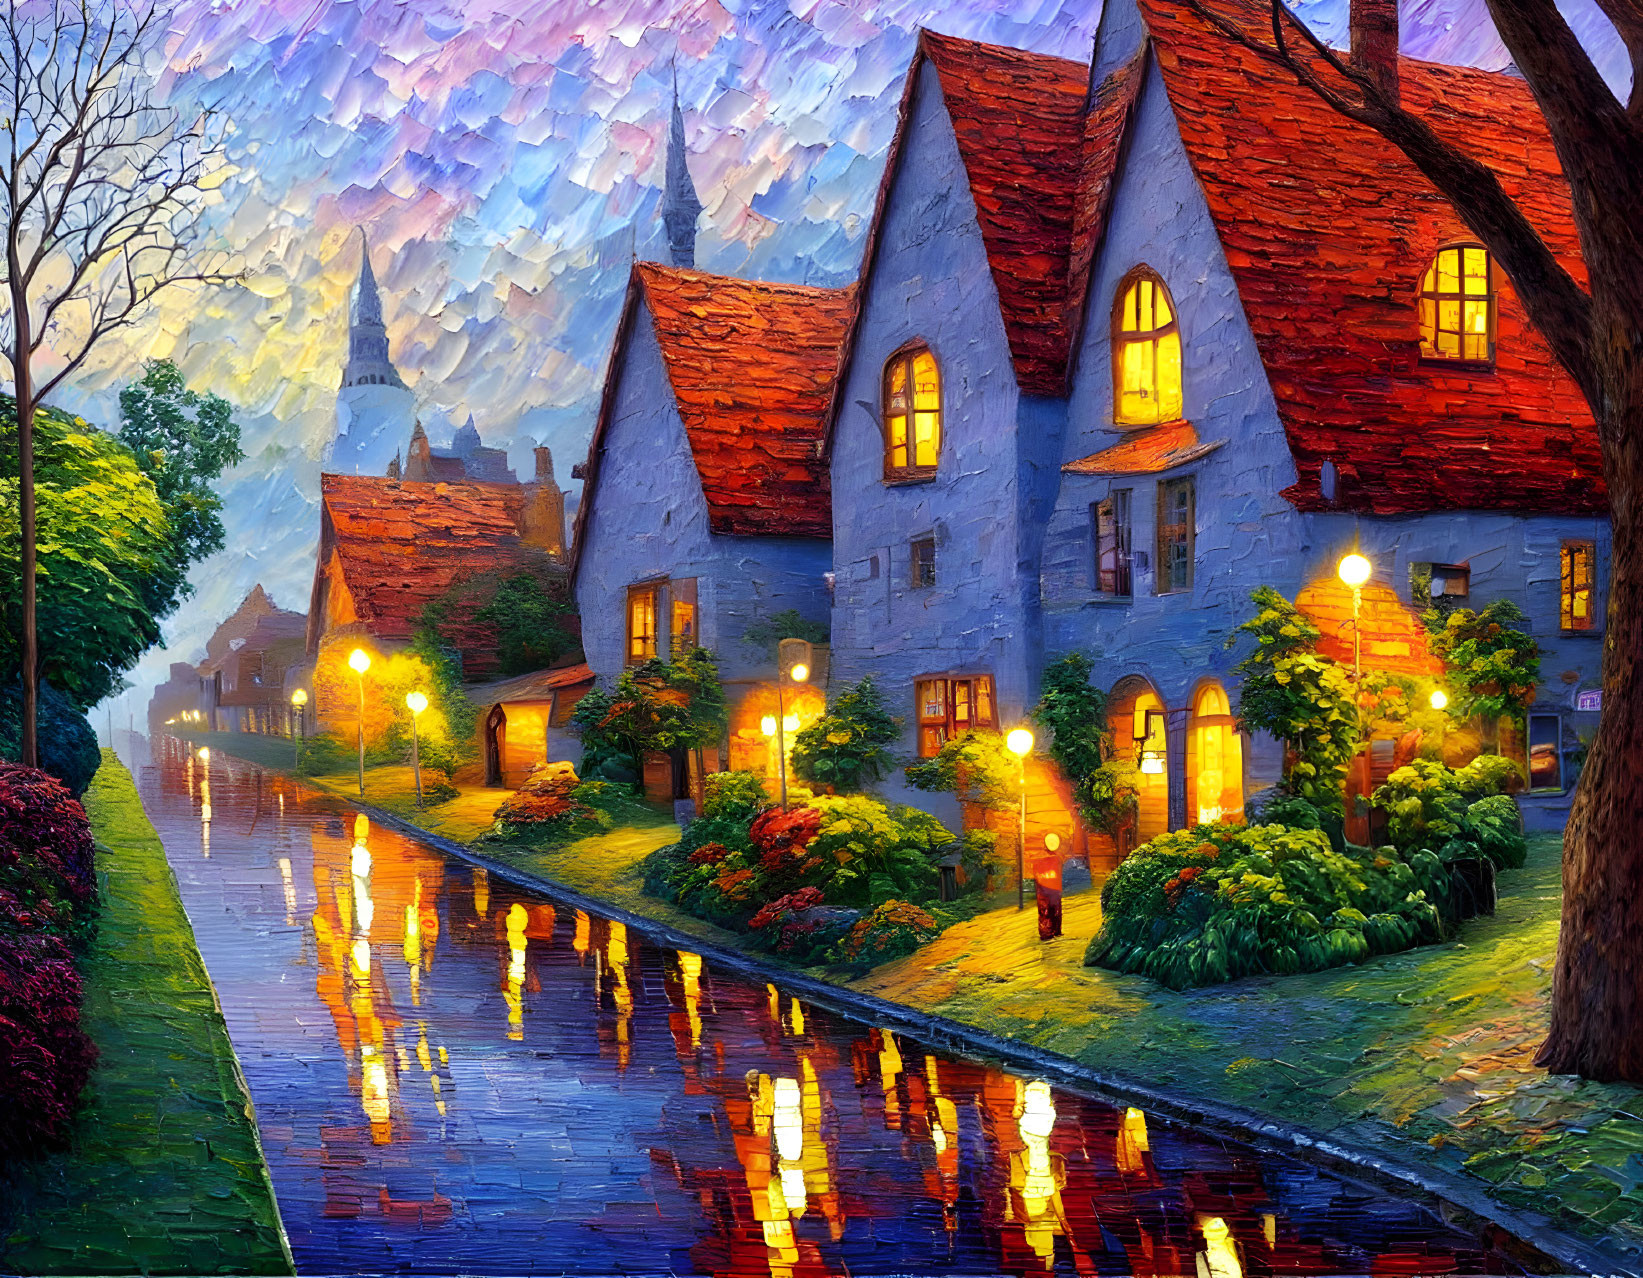 Charming Street Scene at Dusk with Illuminated Buildings